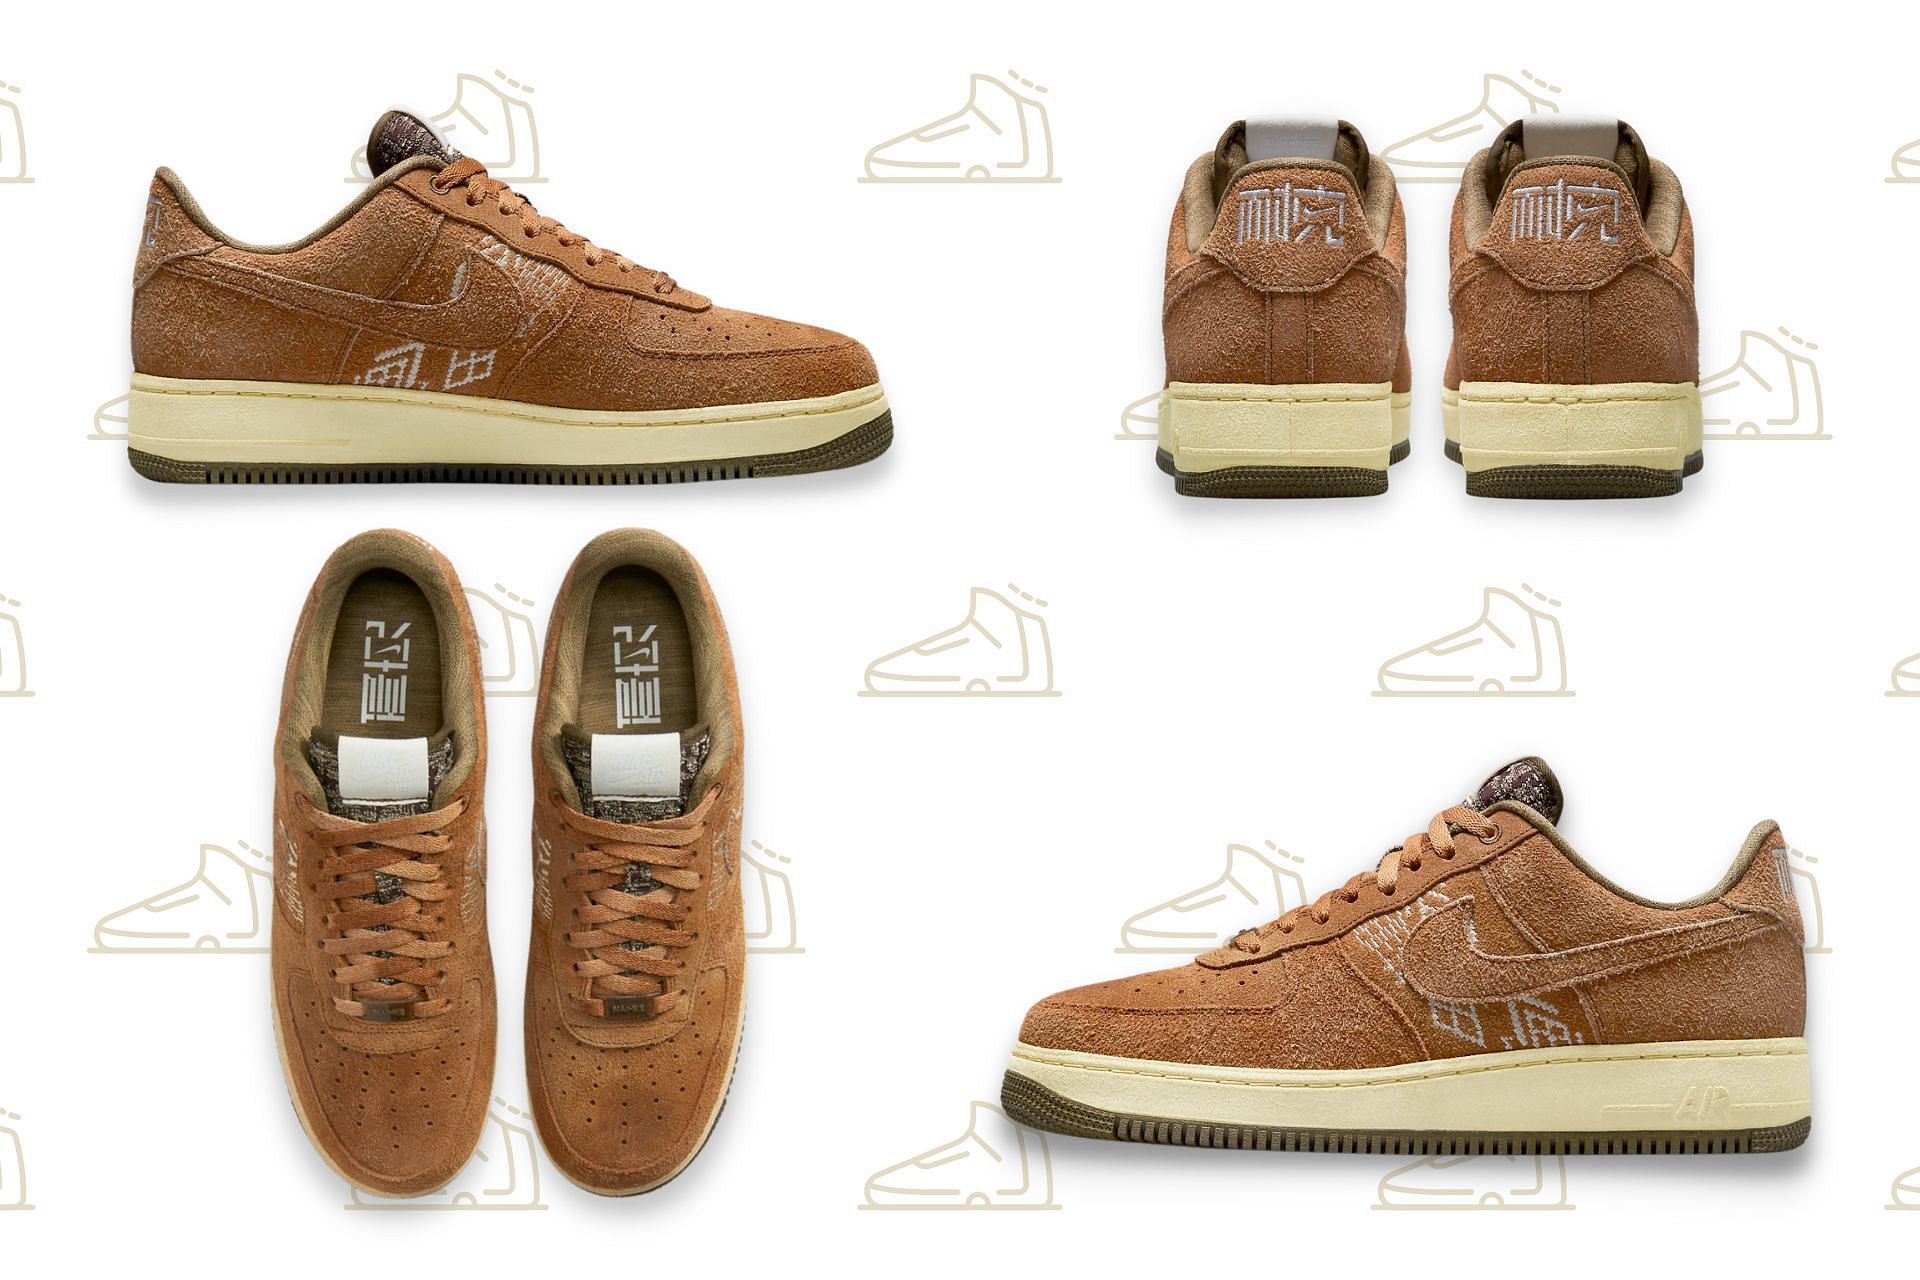 Upcoming Asia-exclusive Nike Air Force 1 Low Nai-Ke Tan sneakers, featuring Chinese cultural references (Image via Sportskeeda)